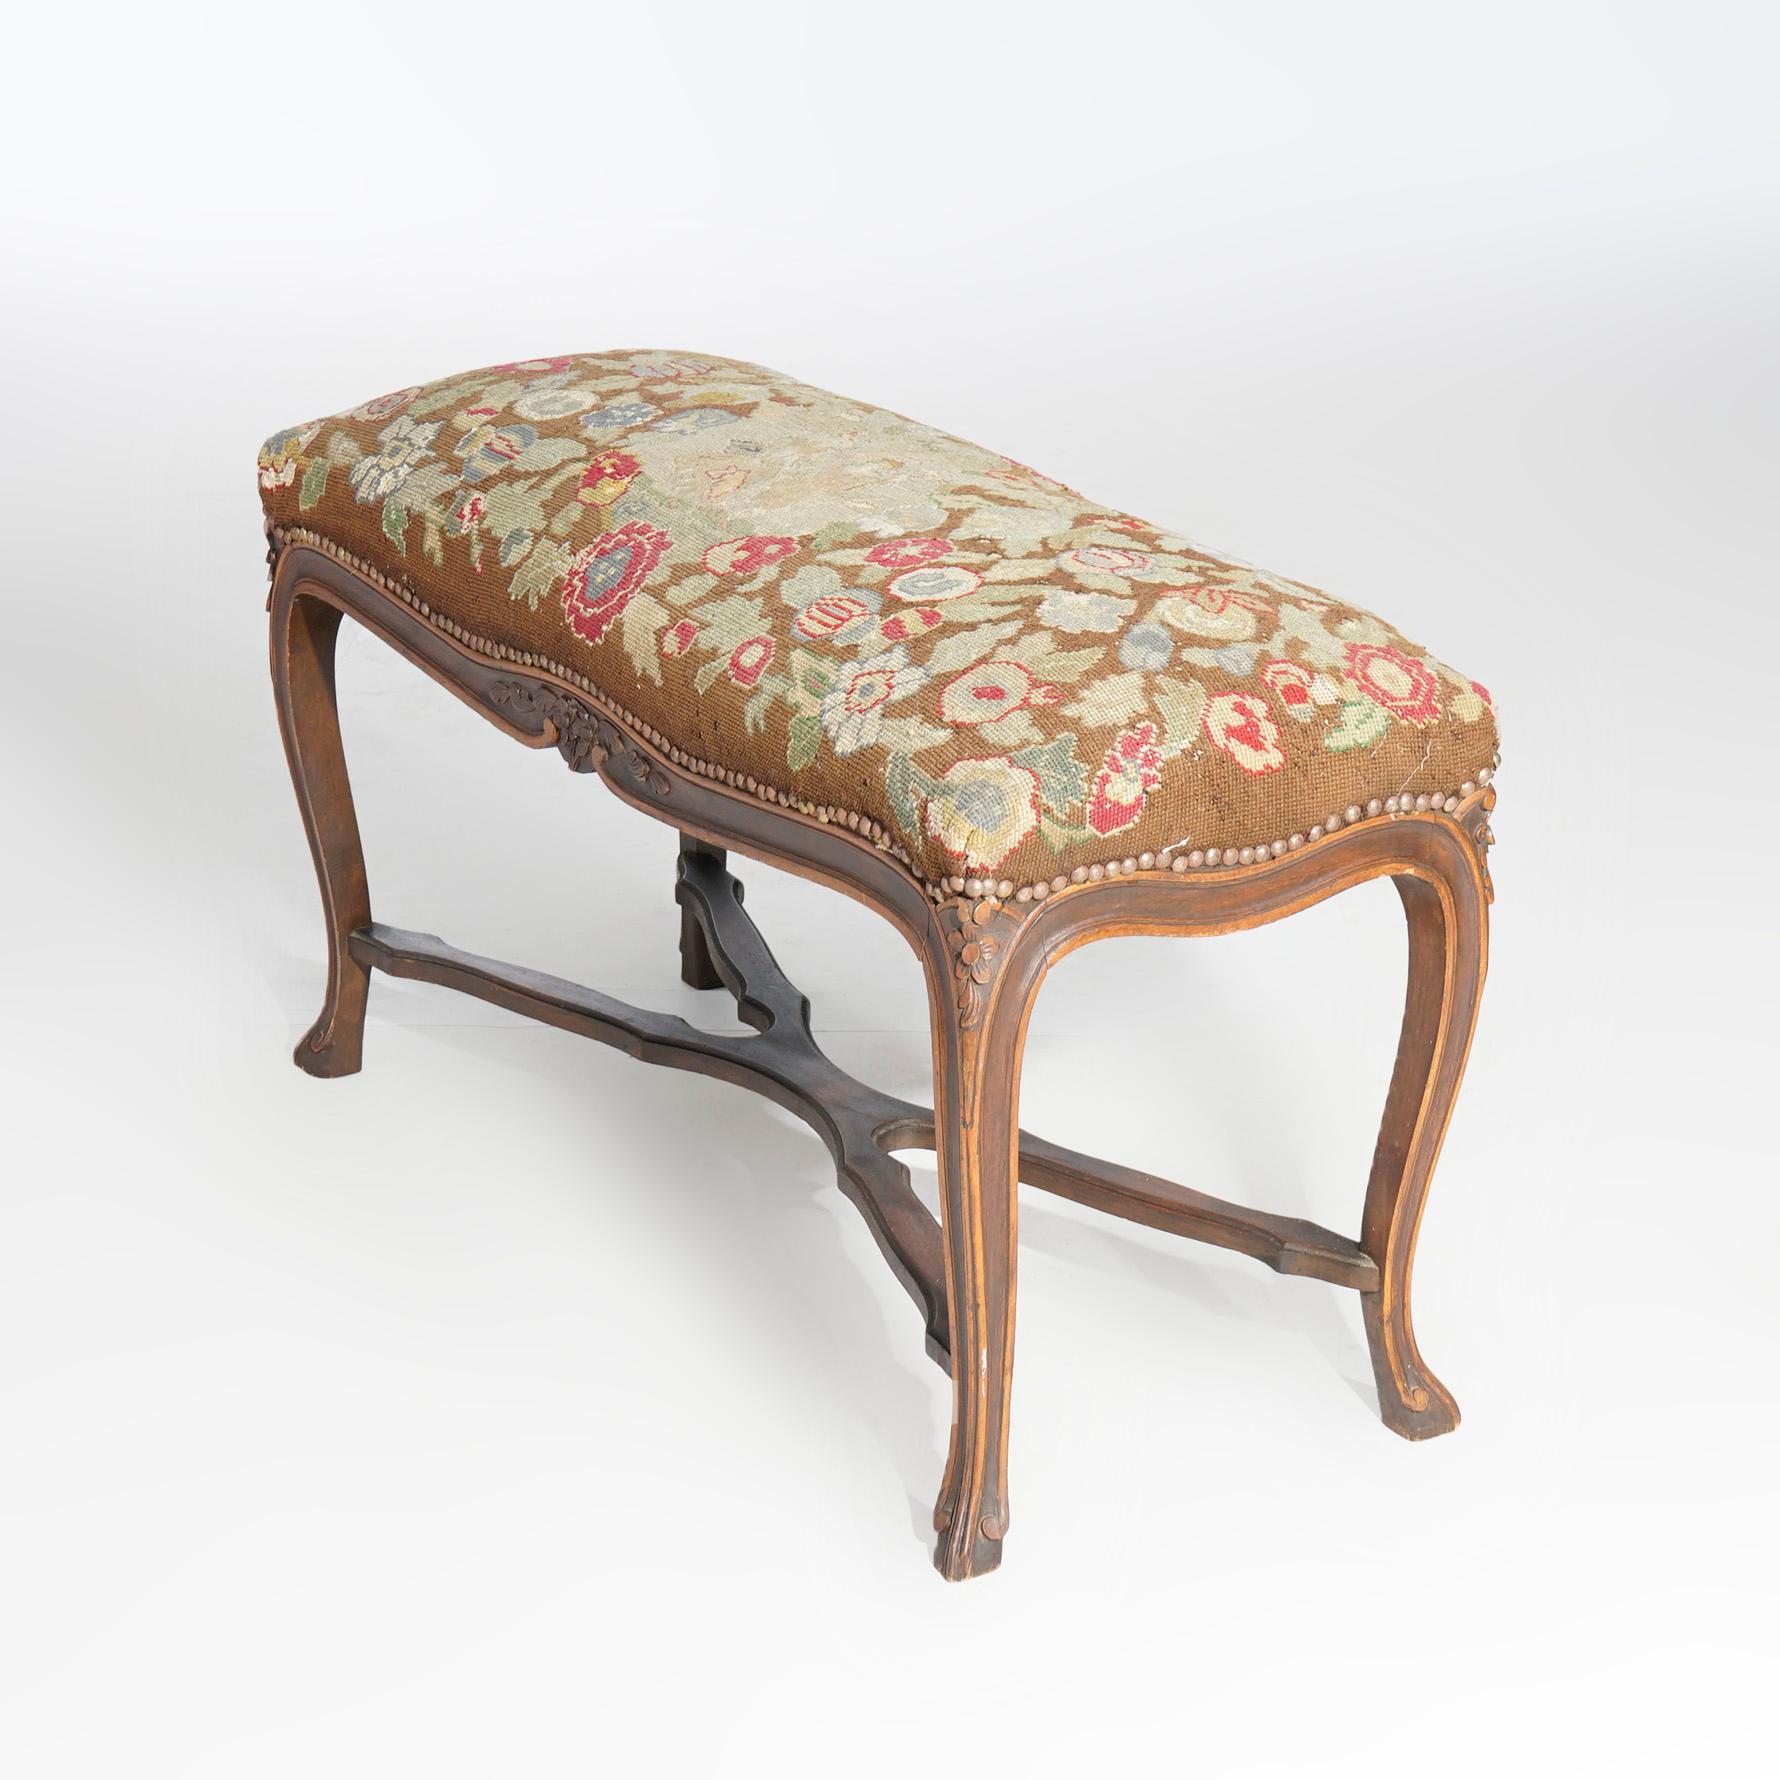 20th Century Antique French Louis XV Style Carved Walnut & Tapestry Long Bench, circa 1920